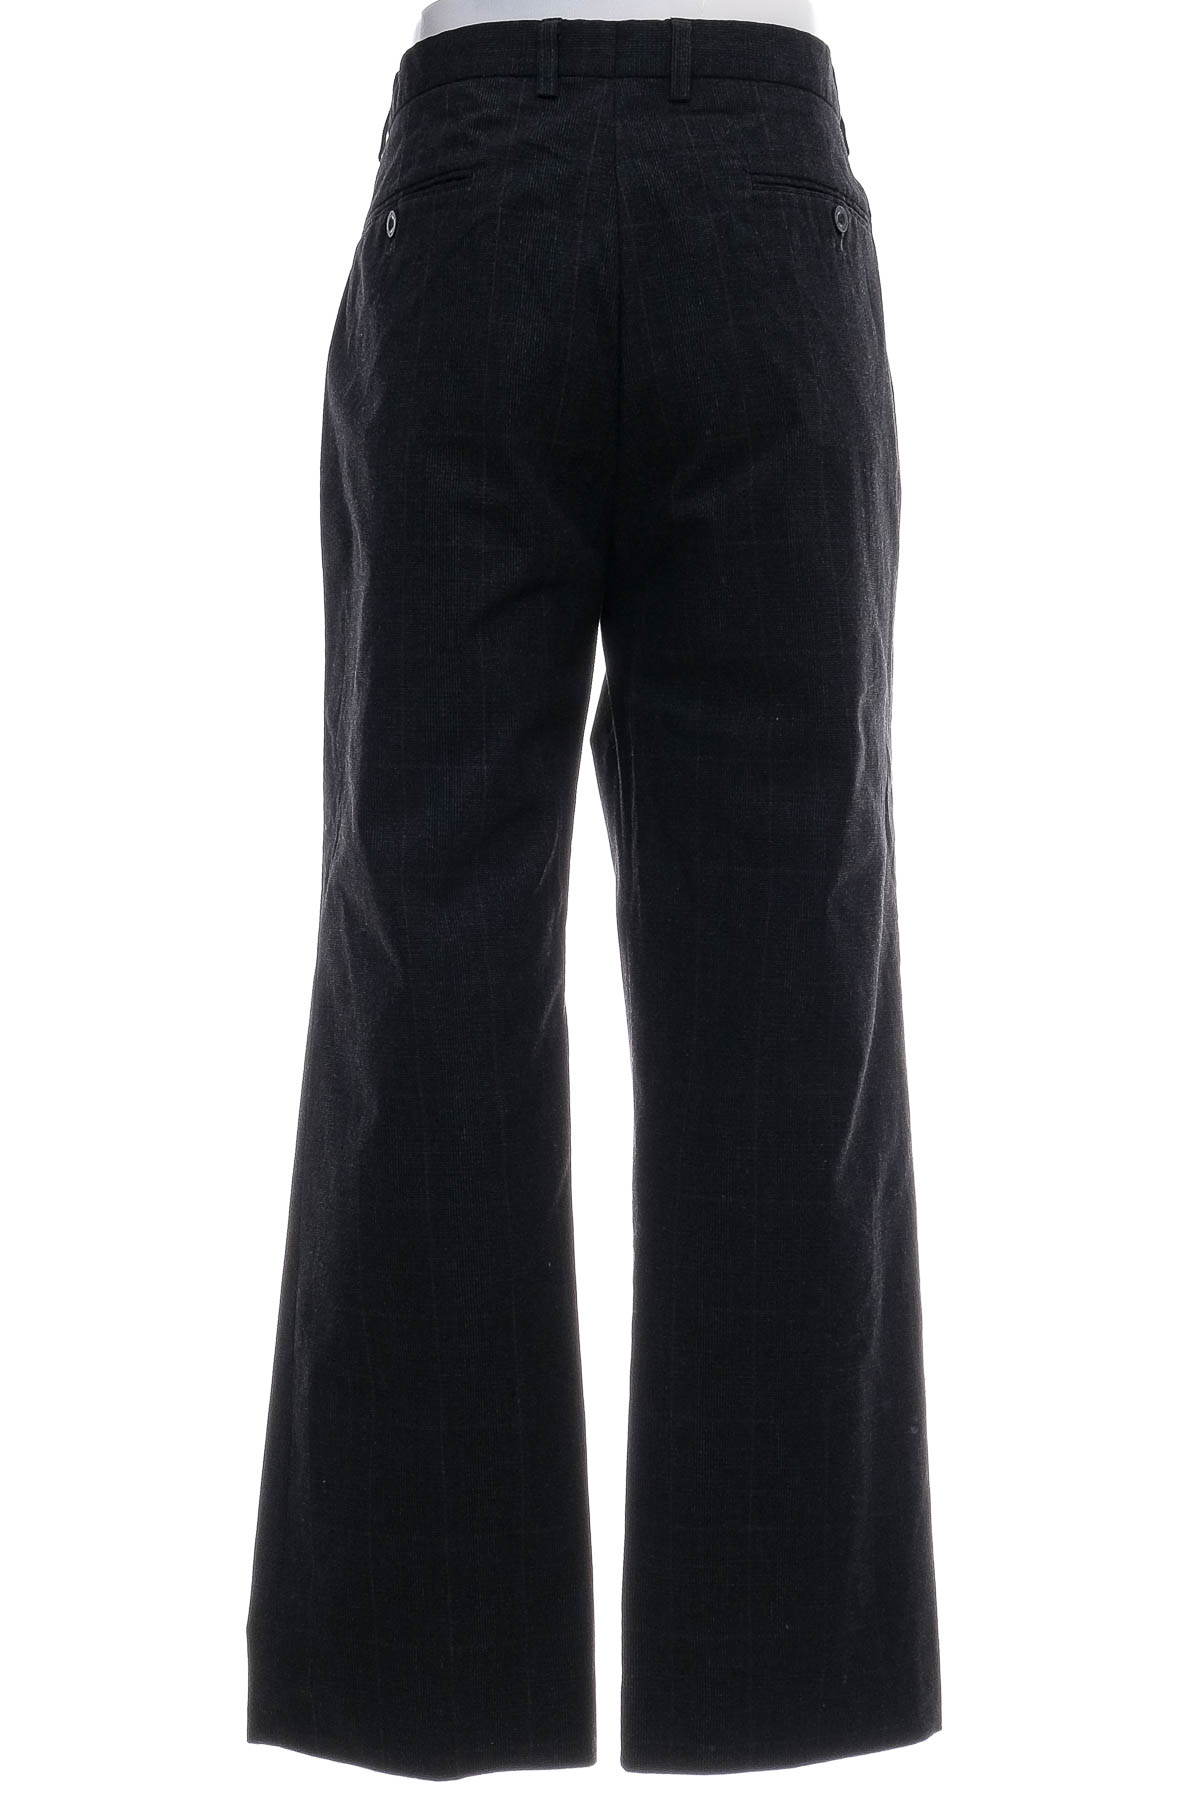 Men's trousers - Coolwater - 1